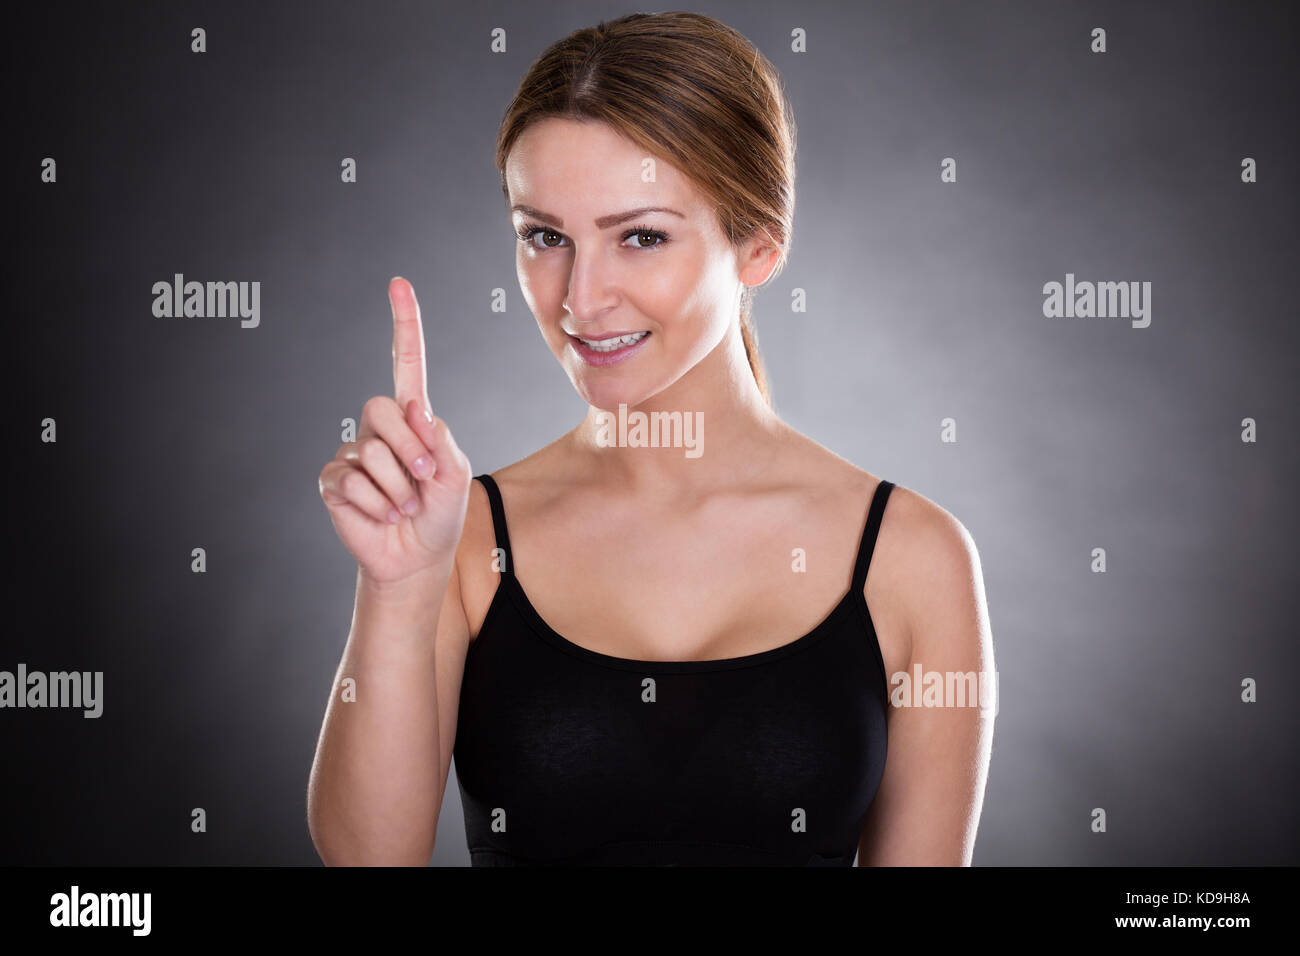 Fitness Woman Touching Screen Over Black Background Stock Photo